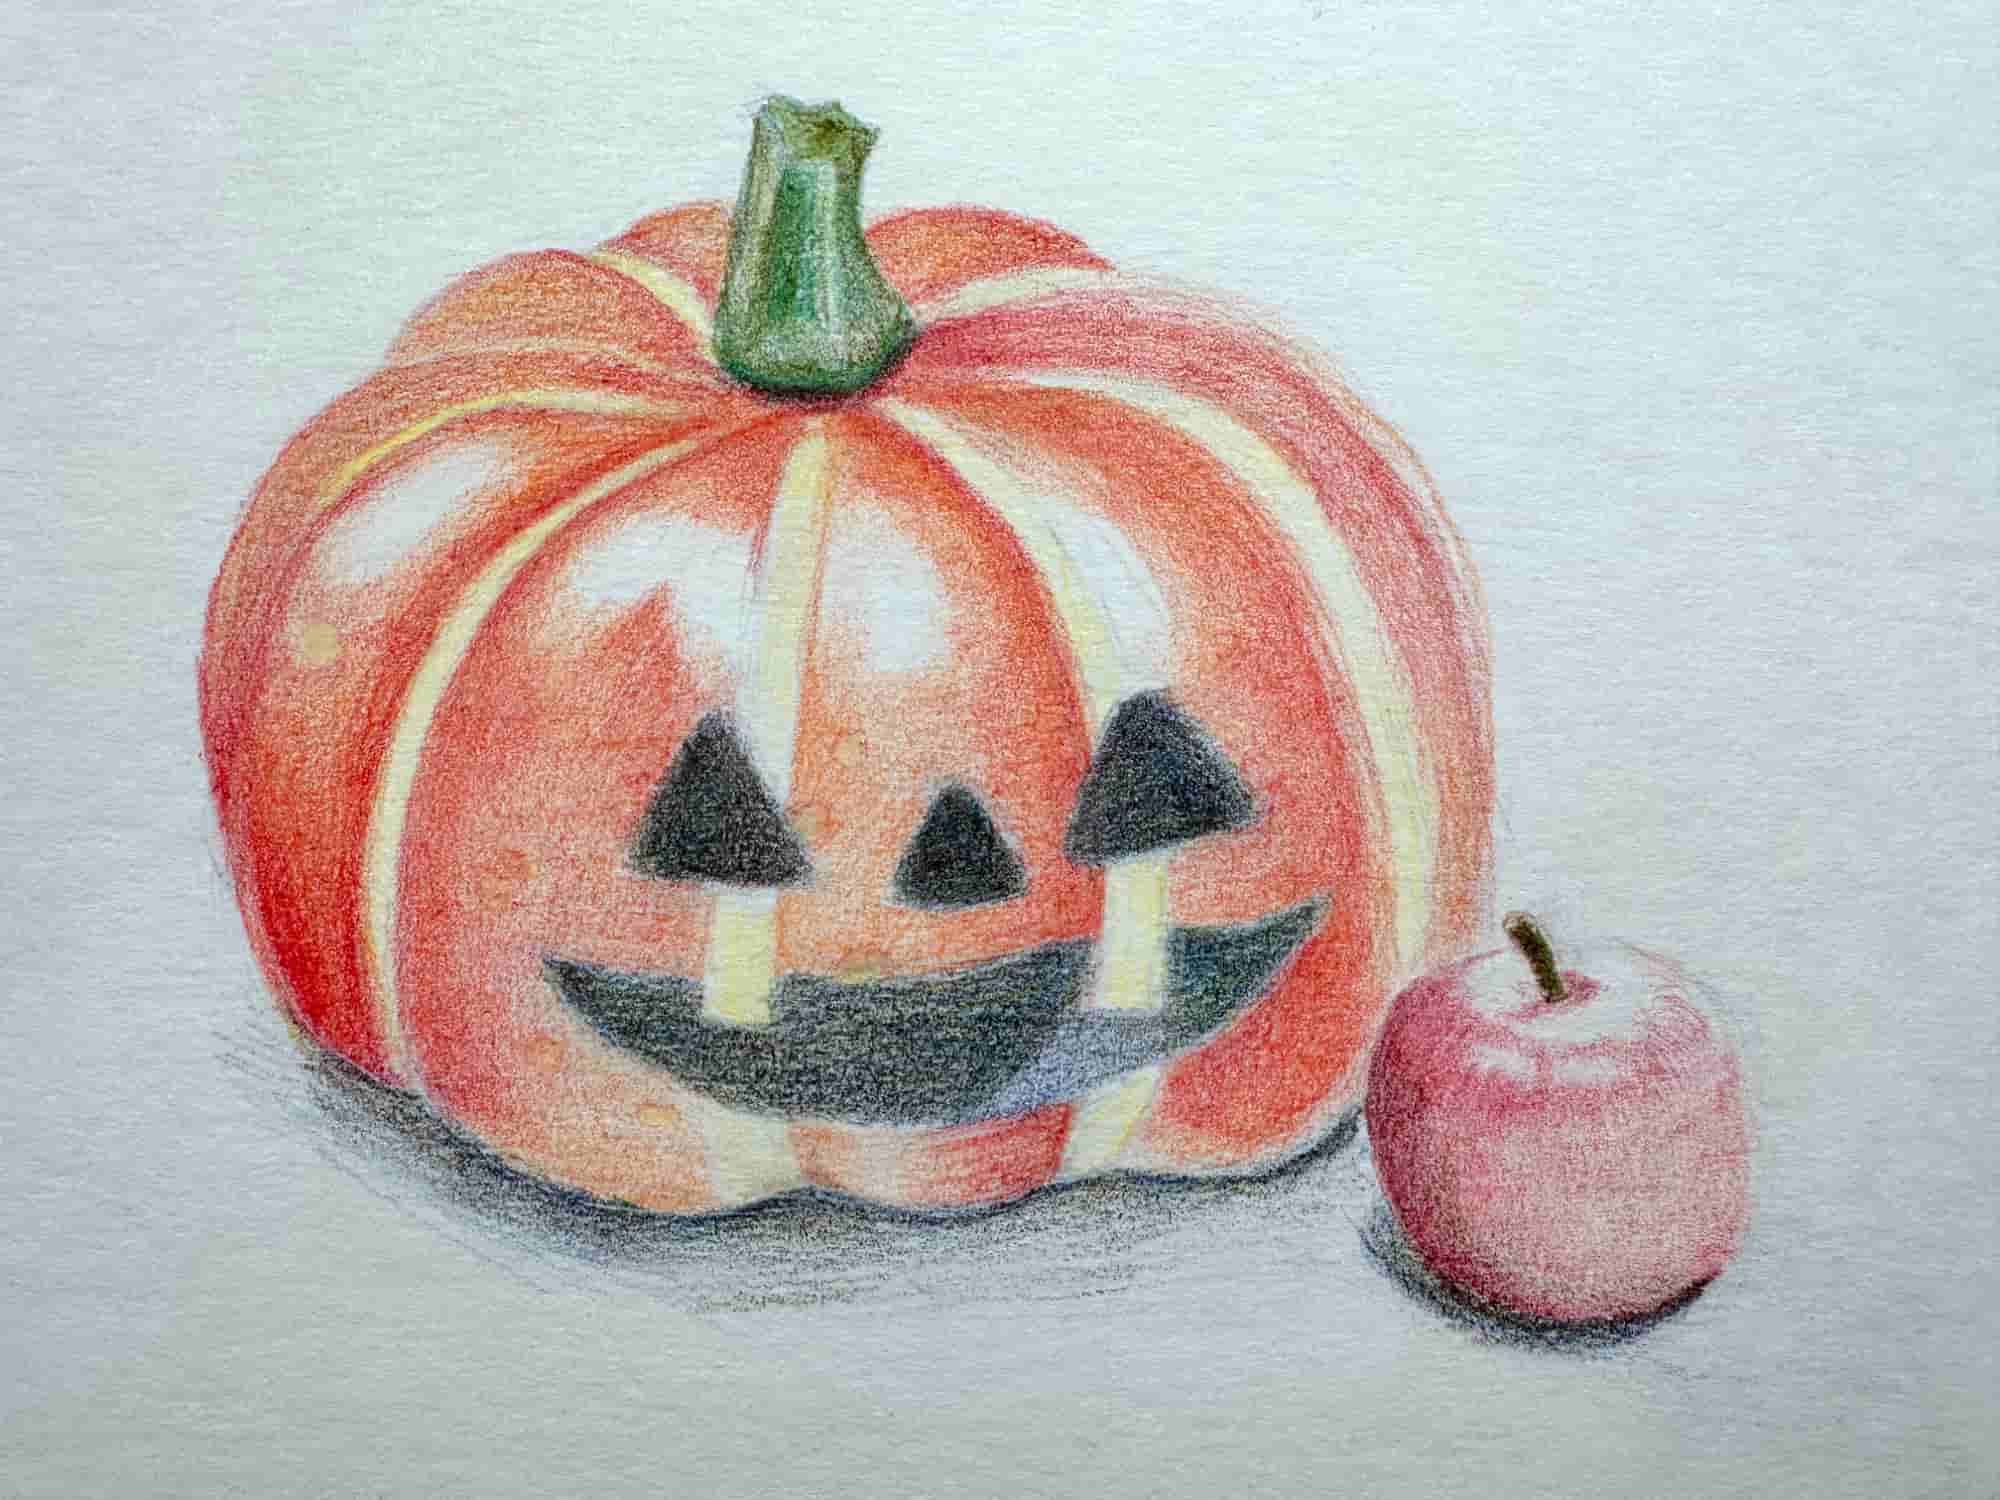 A work in progress drawing of a small pumpkin with an even smaller apple